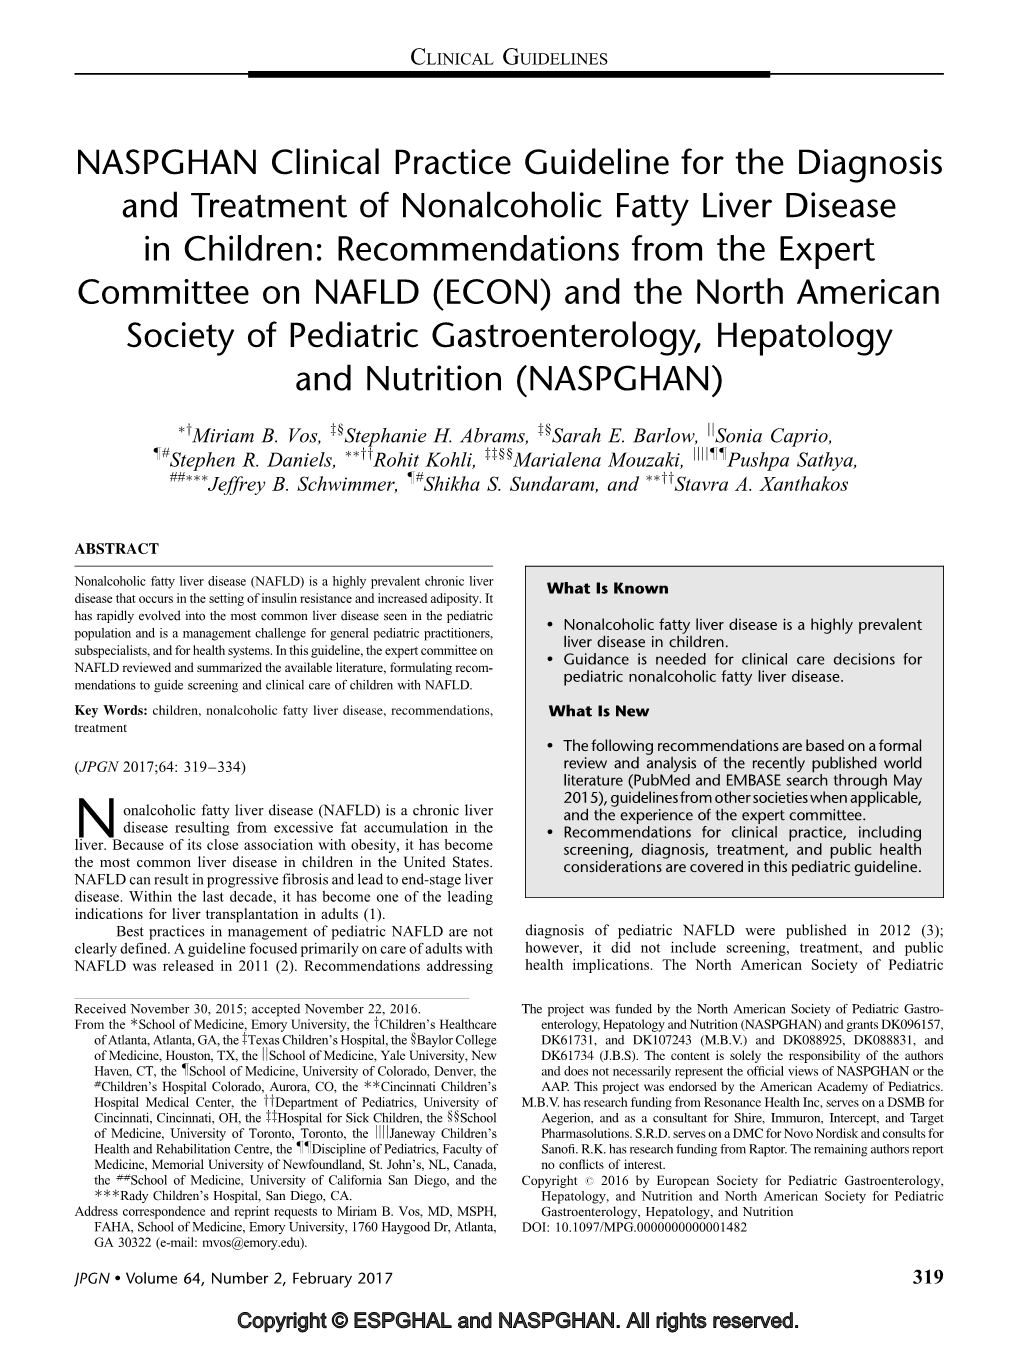 Expert Committee on NAFLD (ECON) and the North American Society of Pediatric Gastroenterology, Hepatology and Nutrition (NASPGHAN)